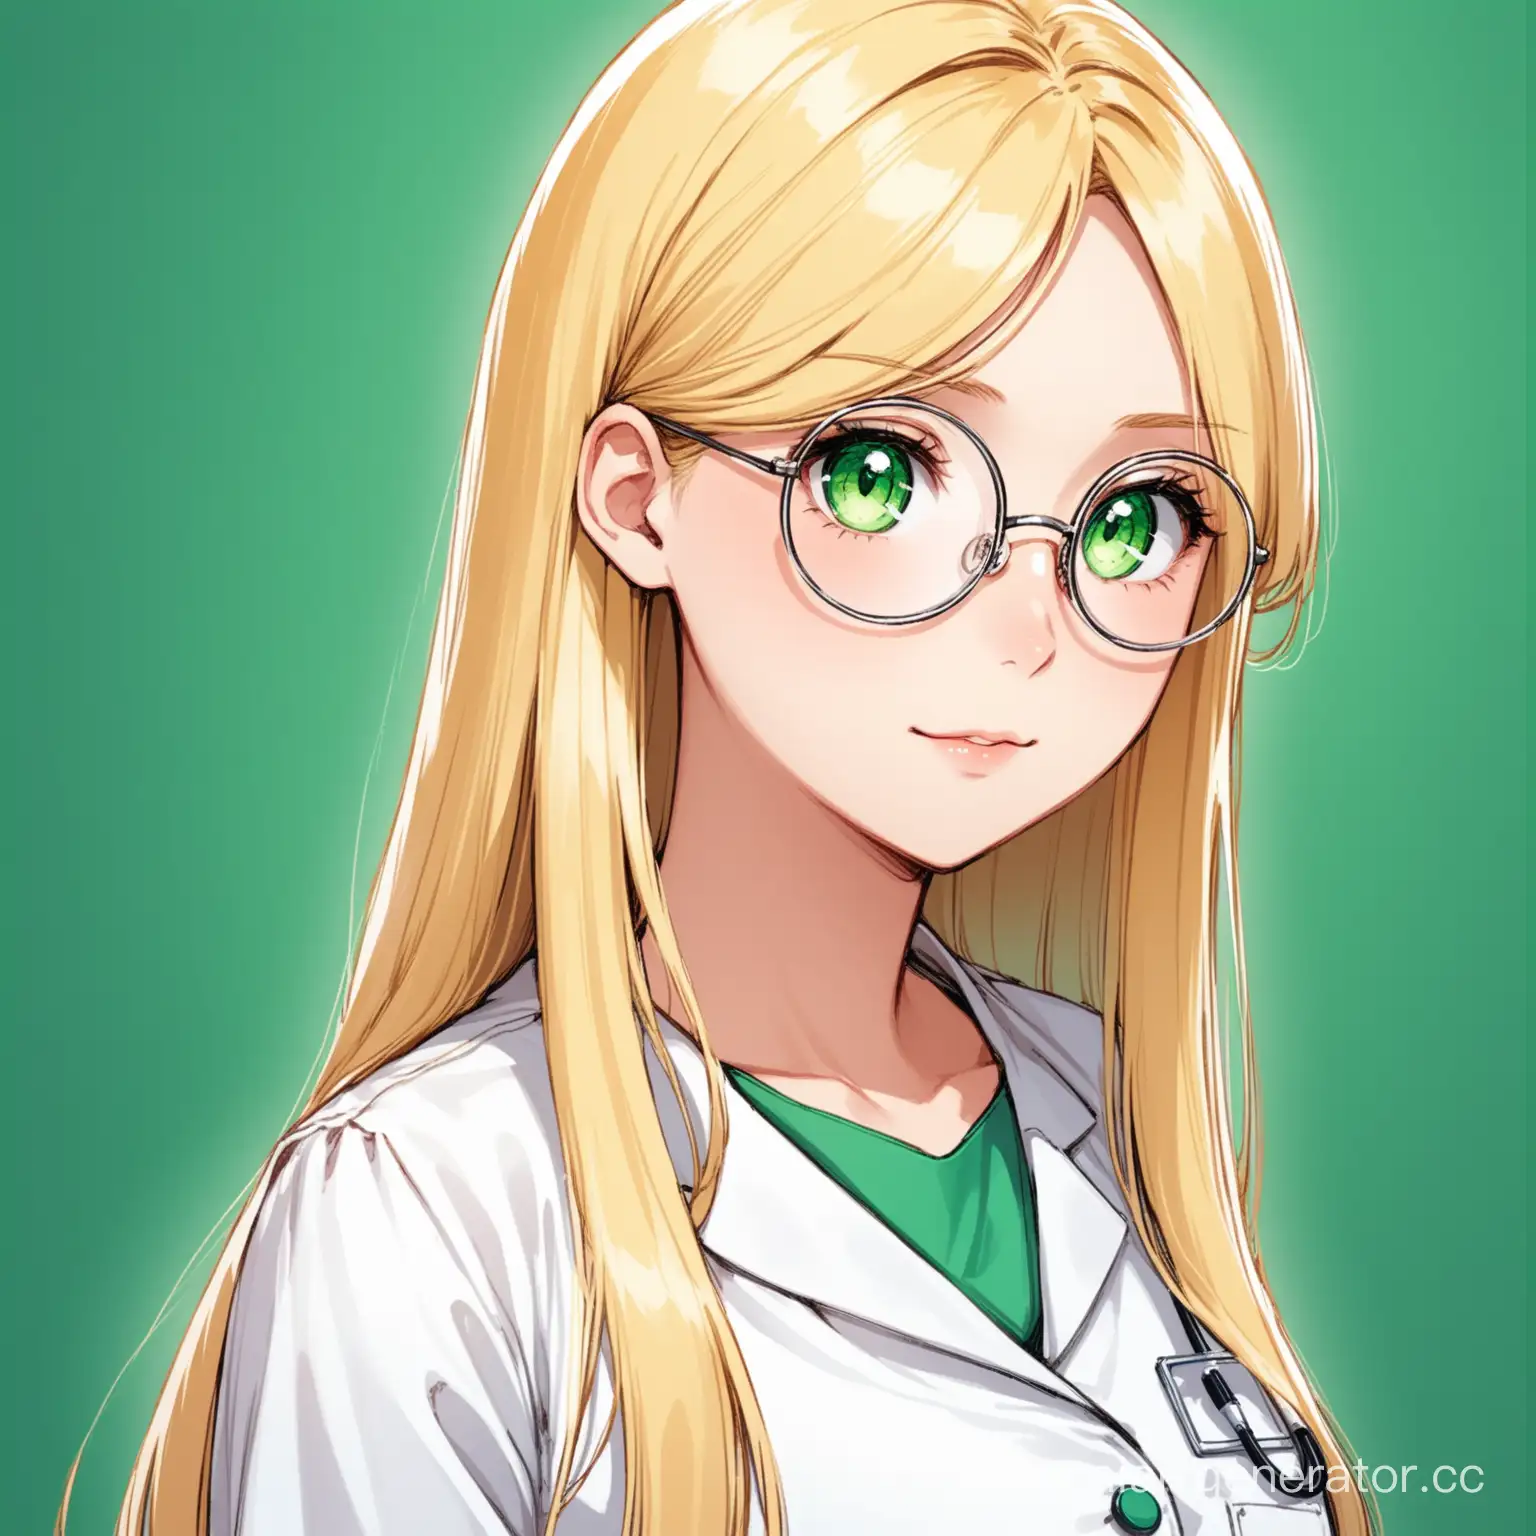 A girl, long straight blonde hair and big green eyes, She is wearing a medical dress and round glasses